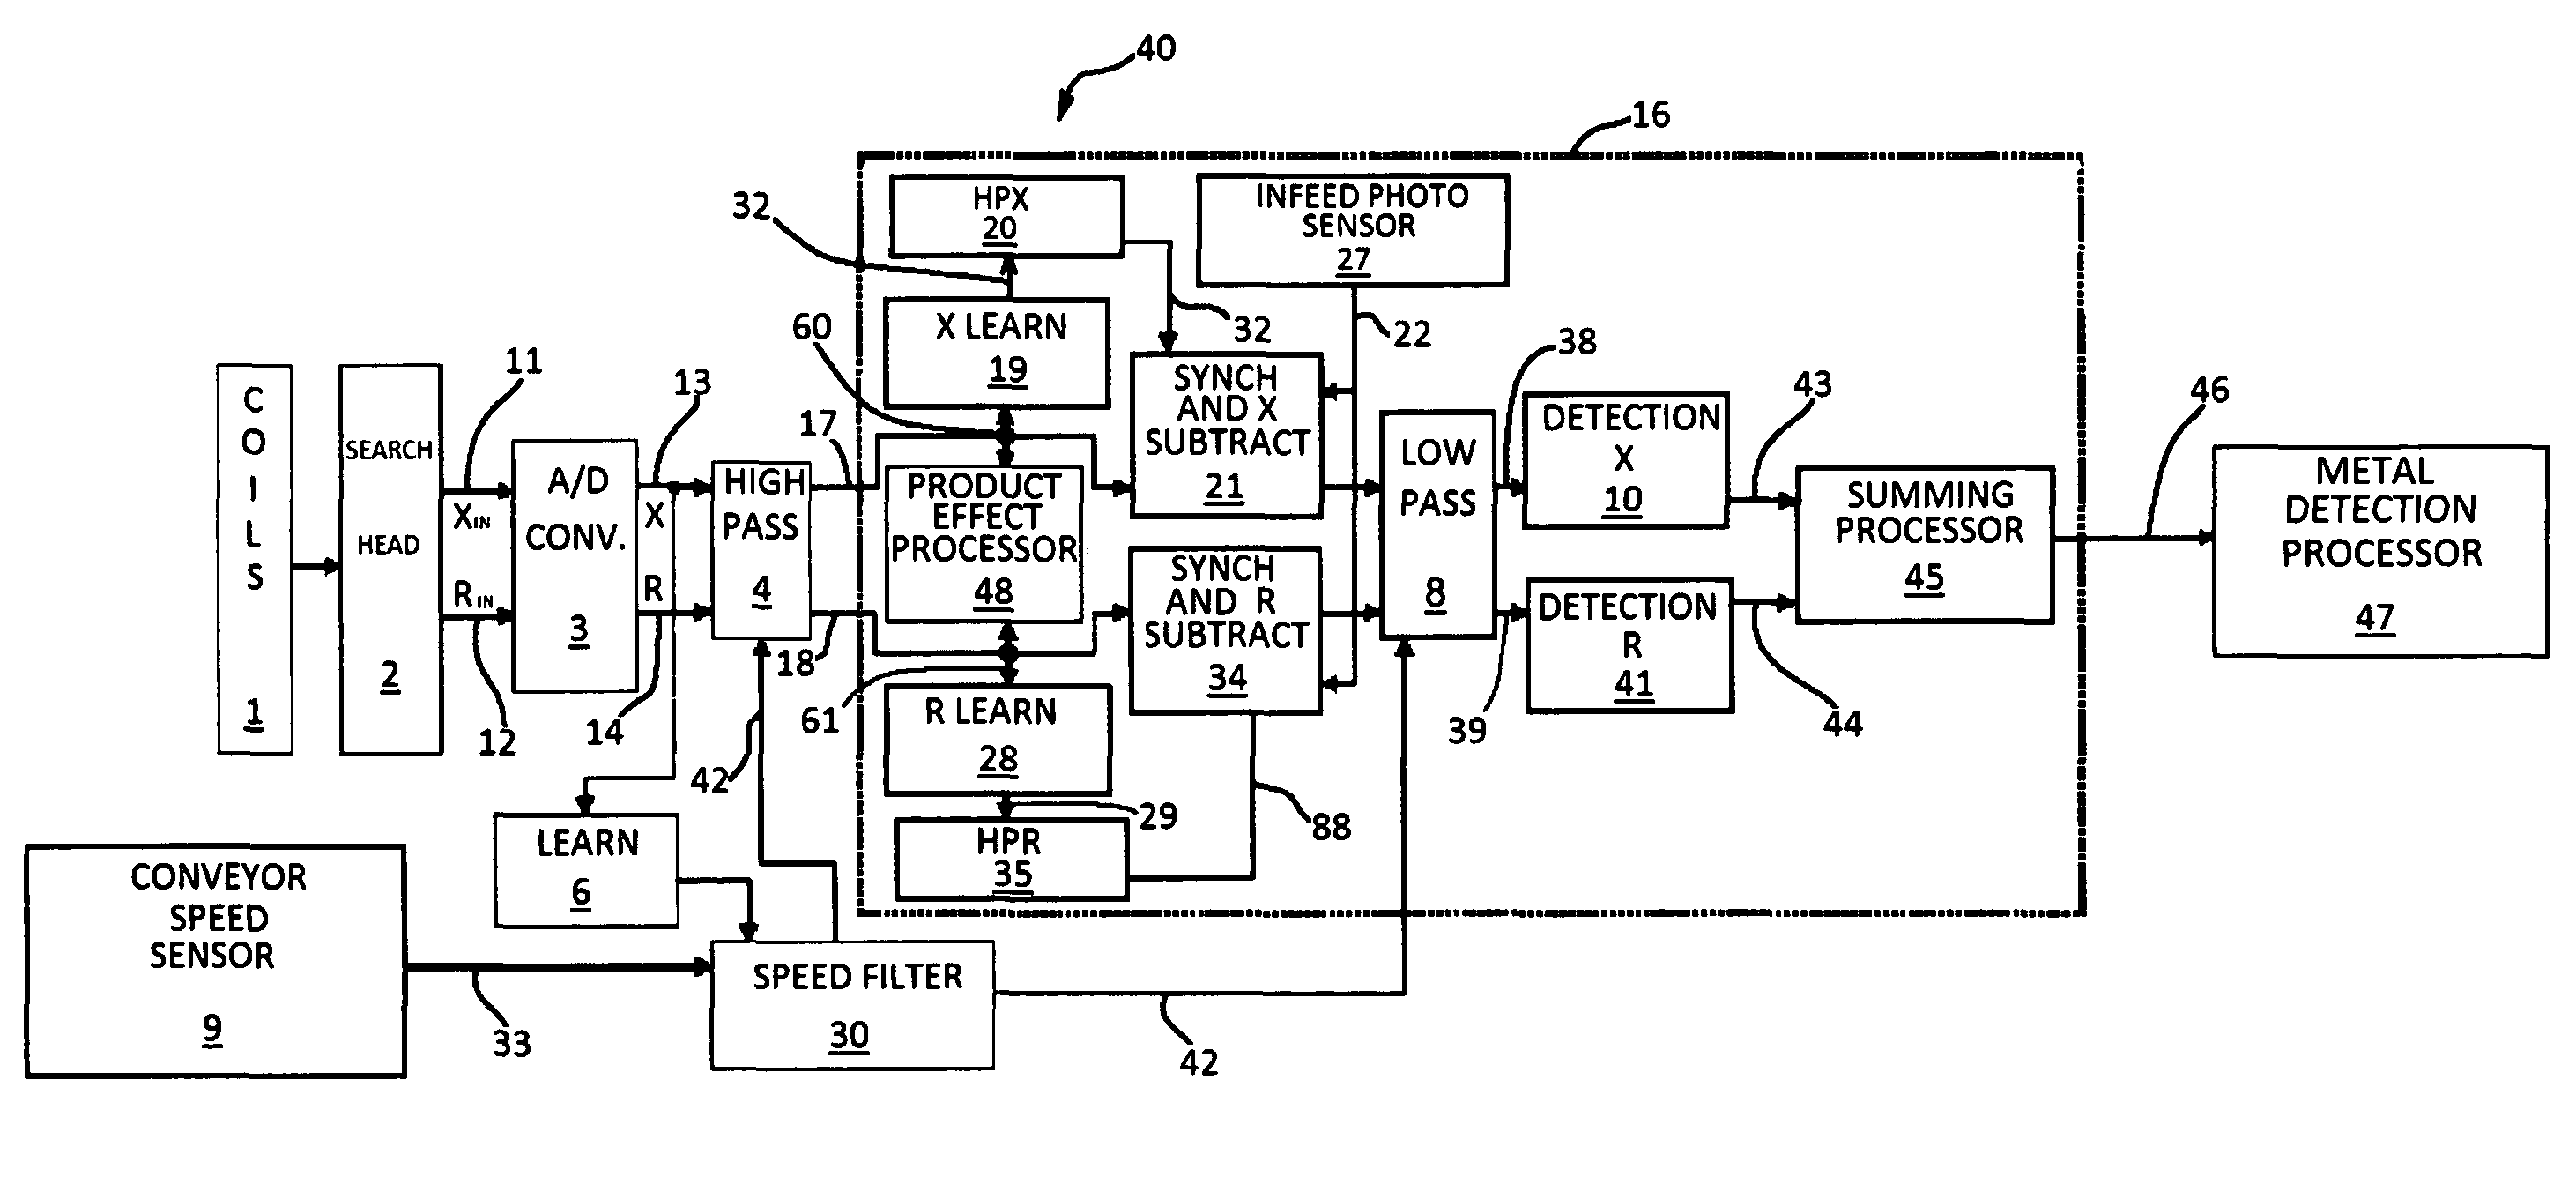 Apparatus and method for automatic product effect compensation in radio frequency metal detectors